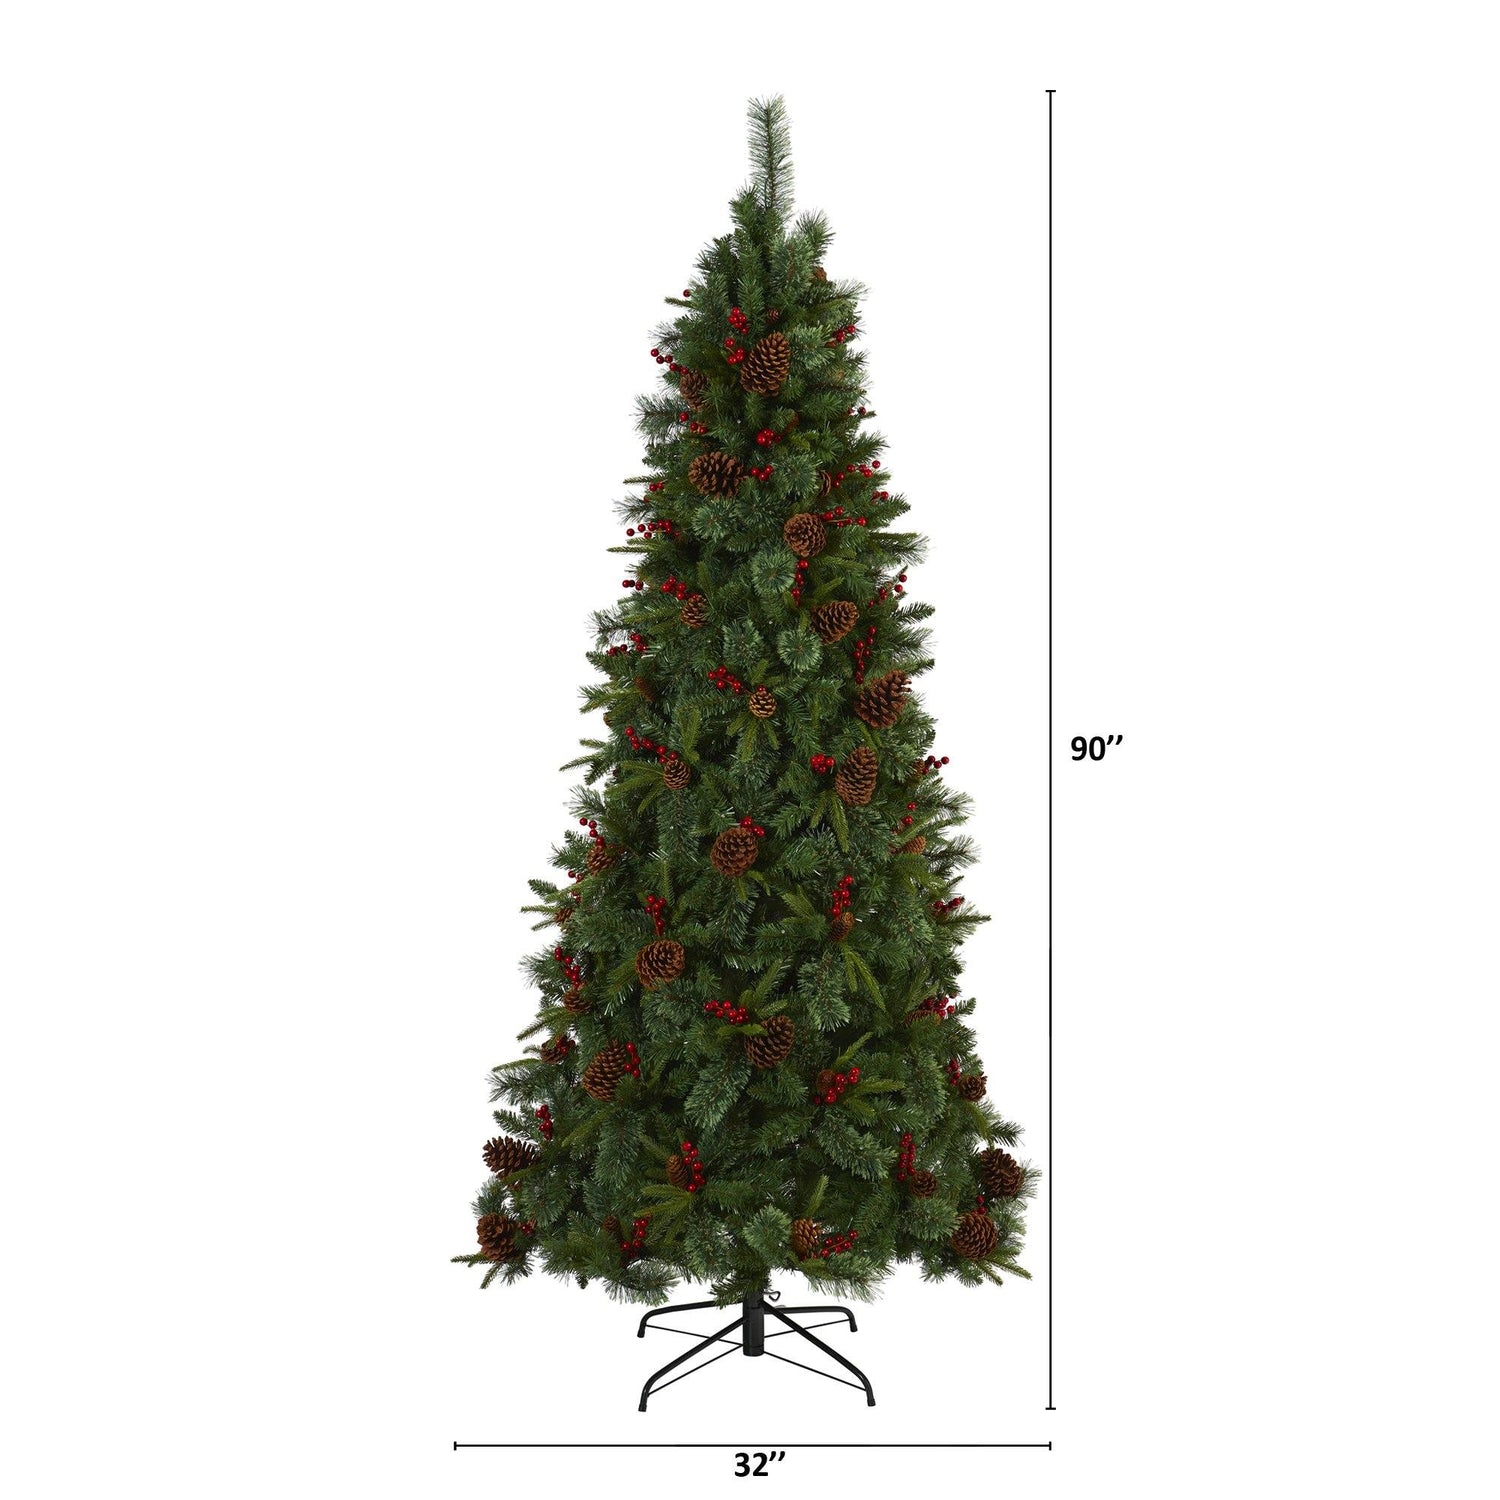 7.5’ Norway Mixed Pine Artificial Christmas Tree with 450 Clear LED Lights, Pine Cones and Berries